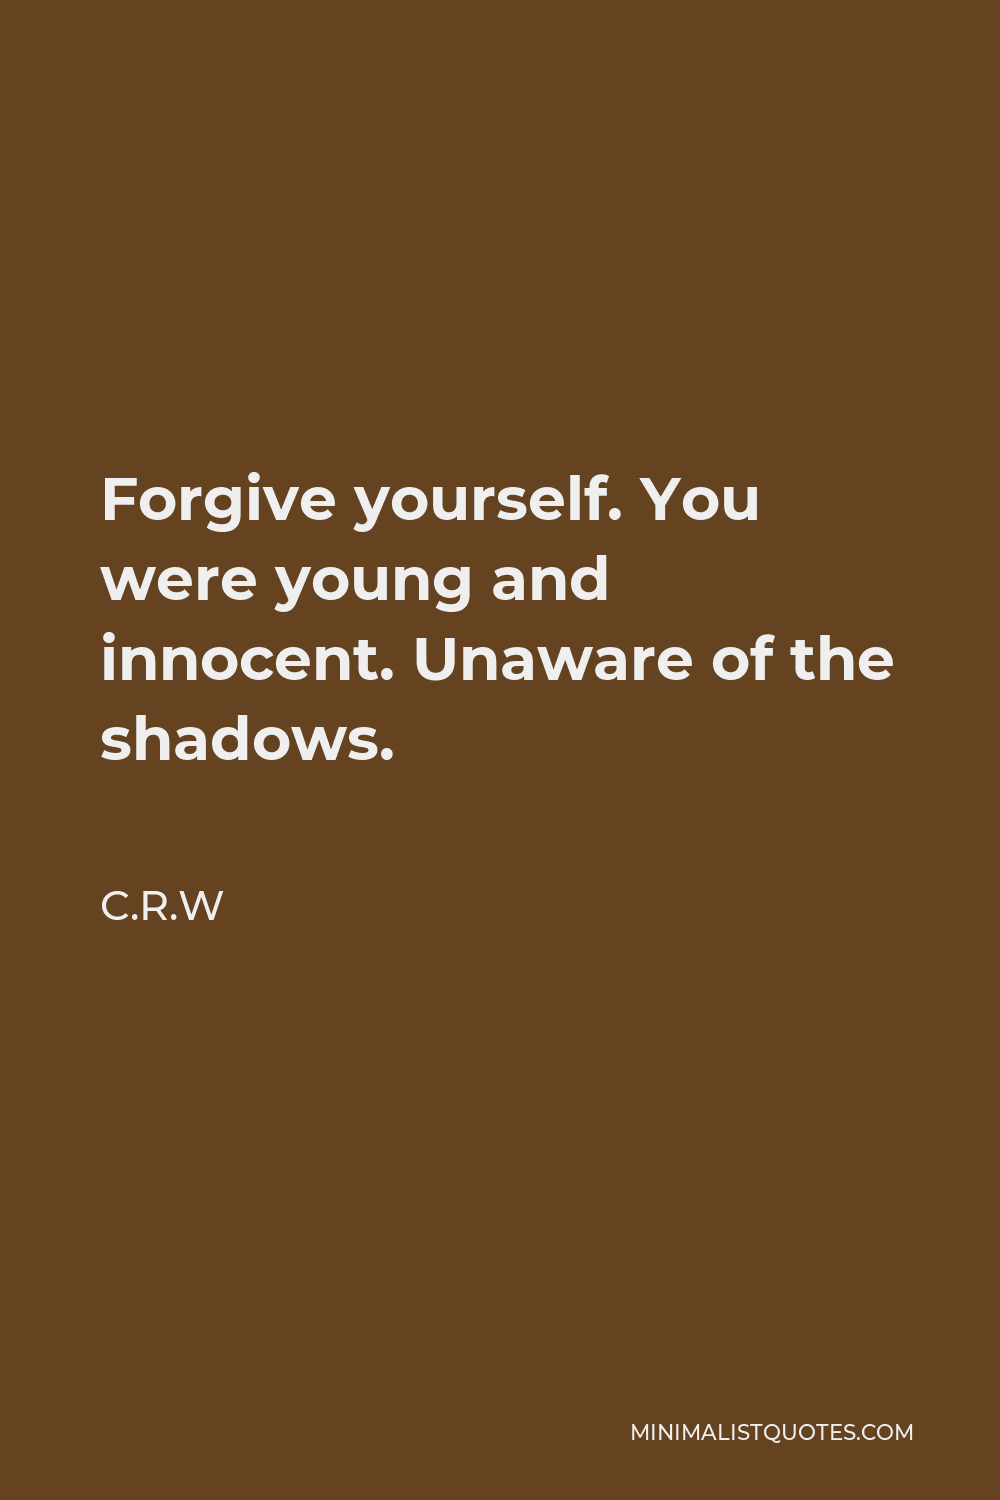 C.R.W Quote - Forgive yourself. You were young and innocent. Unaware of the shadows.